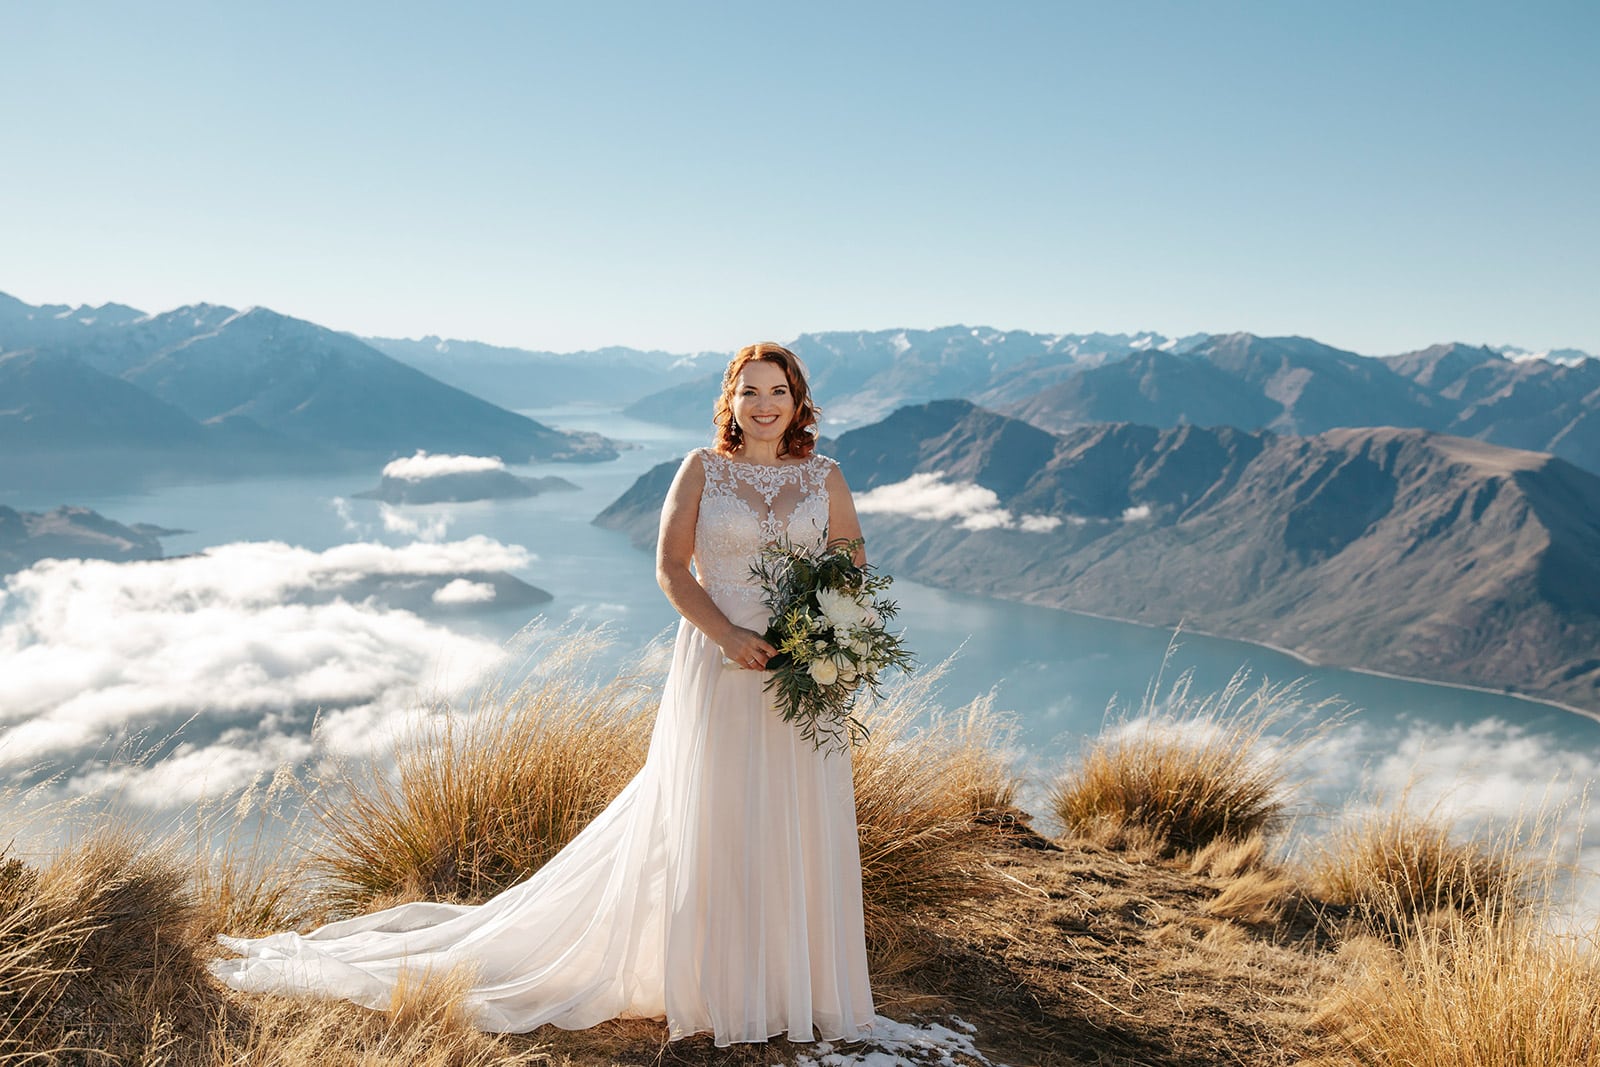 Heli Wedding Queenstown with guests from Matakauri Lodge